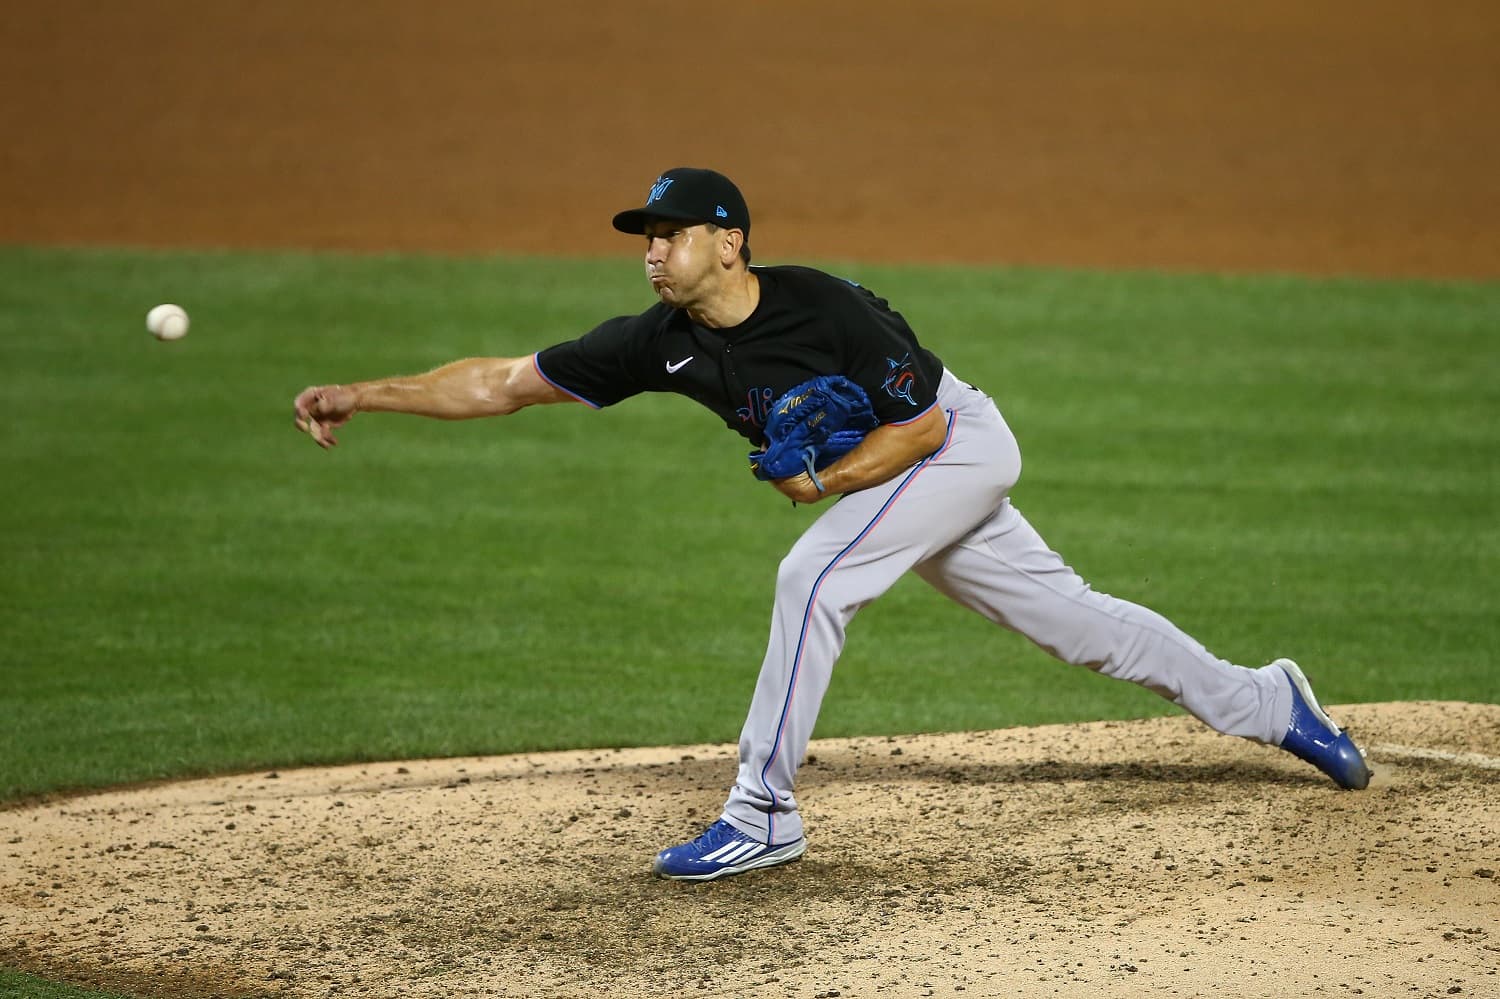 Switch-pitcher Pat Venditte of the Miami Marlins in action against the New York Mets at Citi Field on Aug. 8, 2020. | Mike Stobe/Getty Images